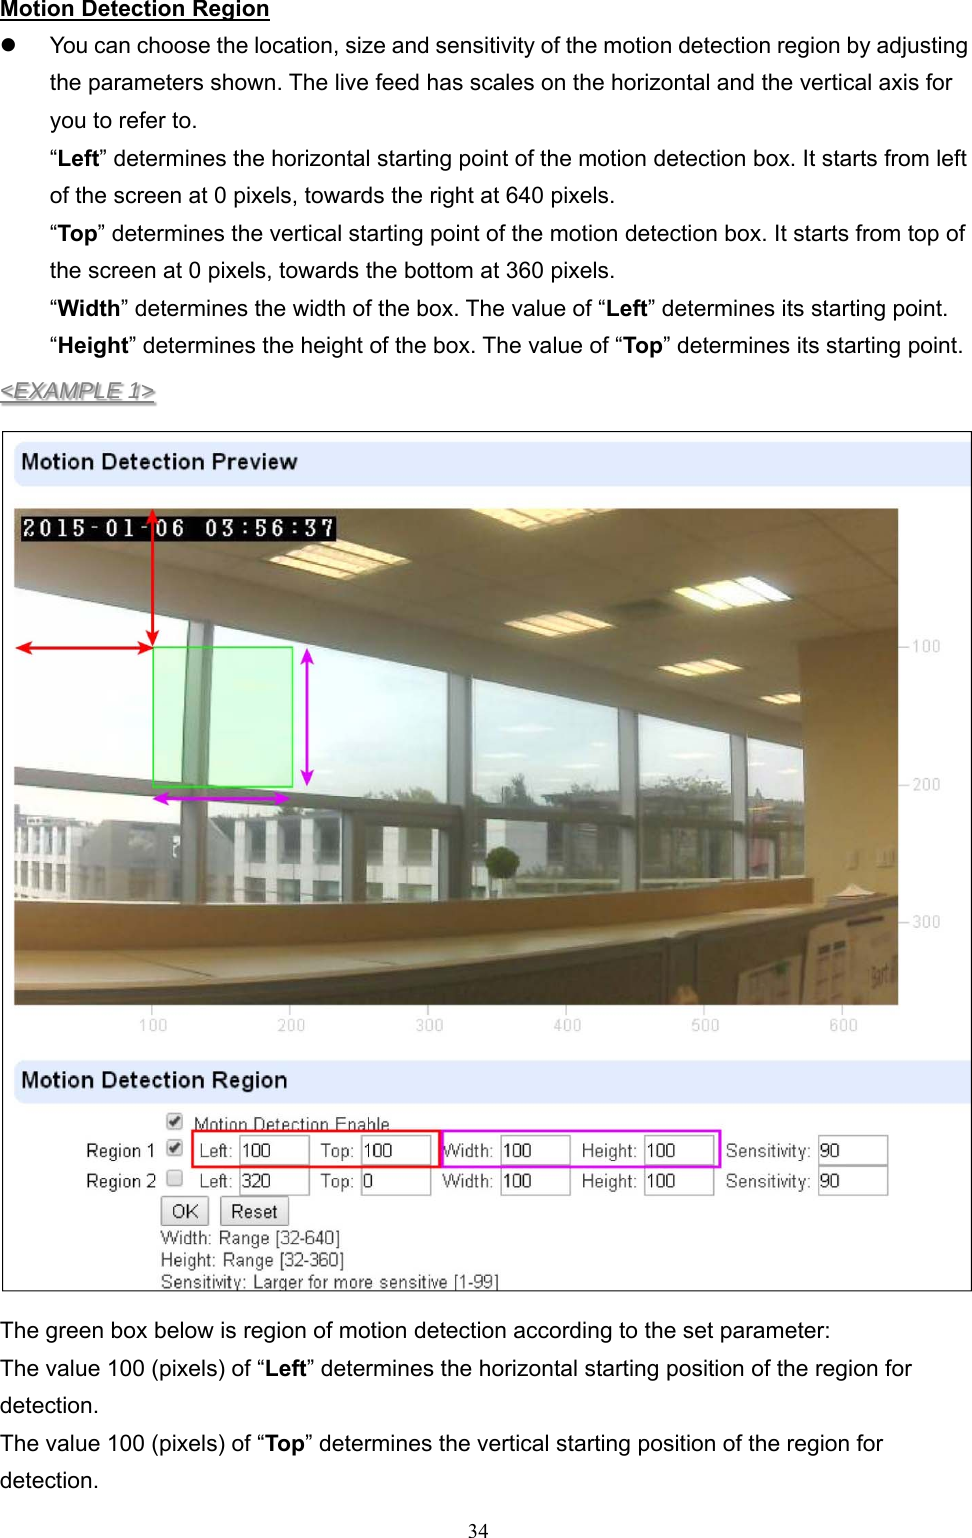  34Motion Detection Region   You can choose the location, size and sensitivity of the motion detection region by adjusting the parameters shown. The live feed has scales on the horizontal and the vertical axis for you to refer to. “Left” determines the horizontal starting point of the motion detection box. It starts from left of the screen at 0 pixels, towards the right at 640 pixels.   “Top” determines the vertical starting point of the motion detection box. It starts from top of the screen at 0 pixels, towards the bottom at 360 pixels. “Width” determines the width of the box. The value of “Left” determines its starting point. “Height” determines the height of the box. The value of “Top” determines its starting point. &lt;EXAMPLE 1&gt;  The green box below is region of motion detection according to the set parameter: The value 100 (pixels) of “Left” determines the horizontal starting position of the region for detection. The value 100 (pixels) of “Top” determines the vertical starting position of the region for detection. 